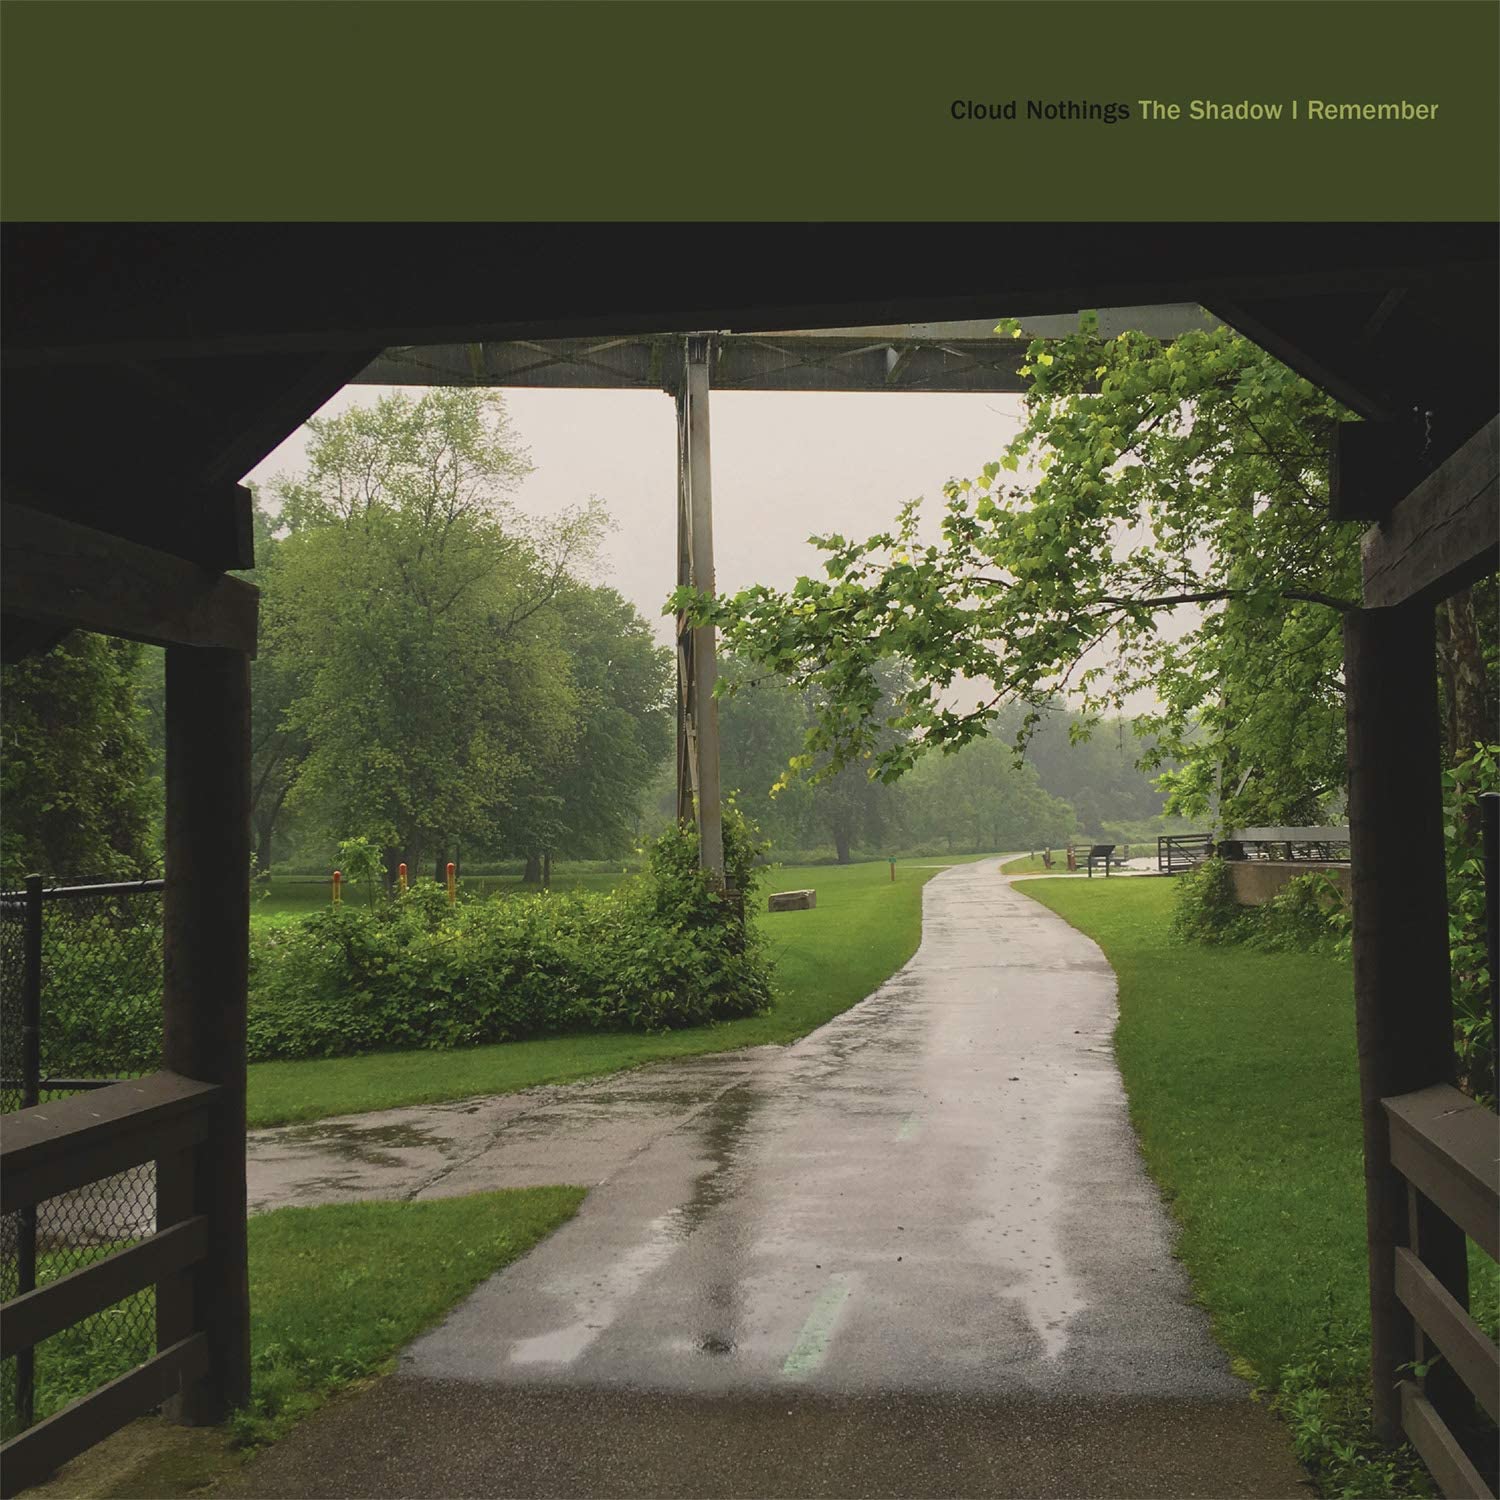 Cloud nothings - 『The shadow I remember』